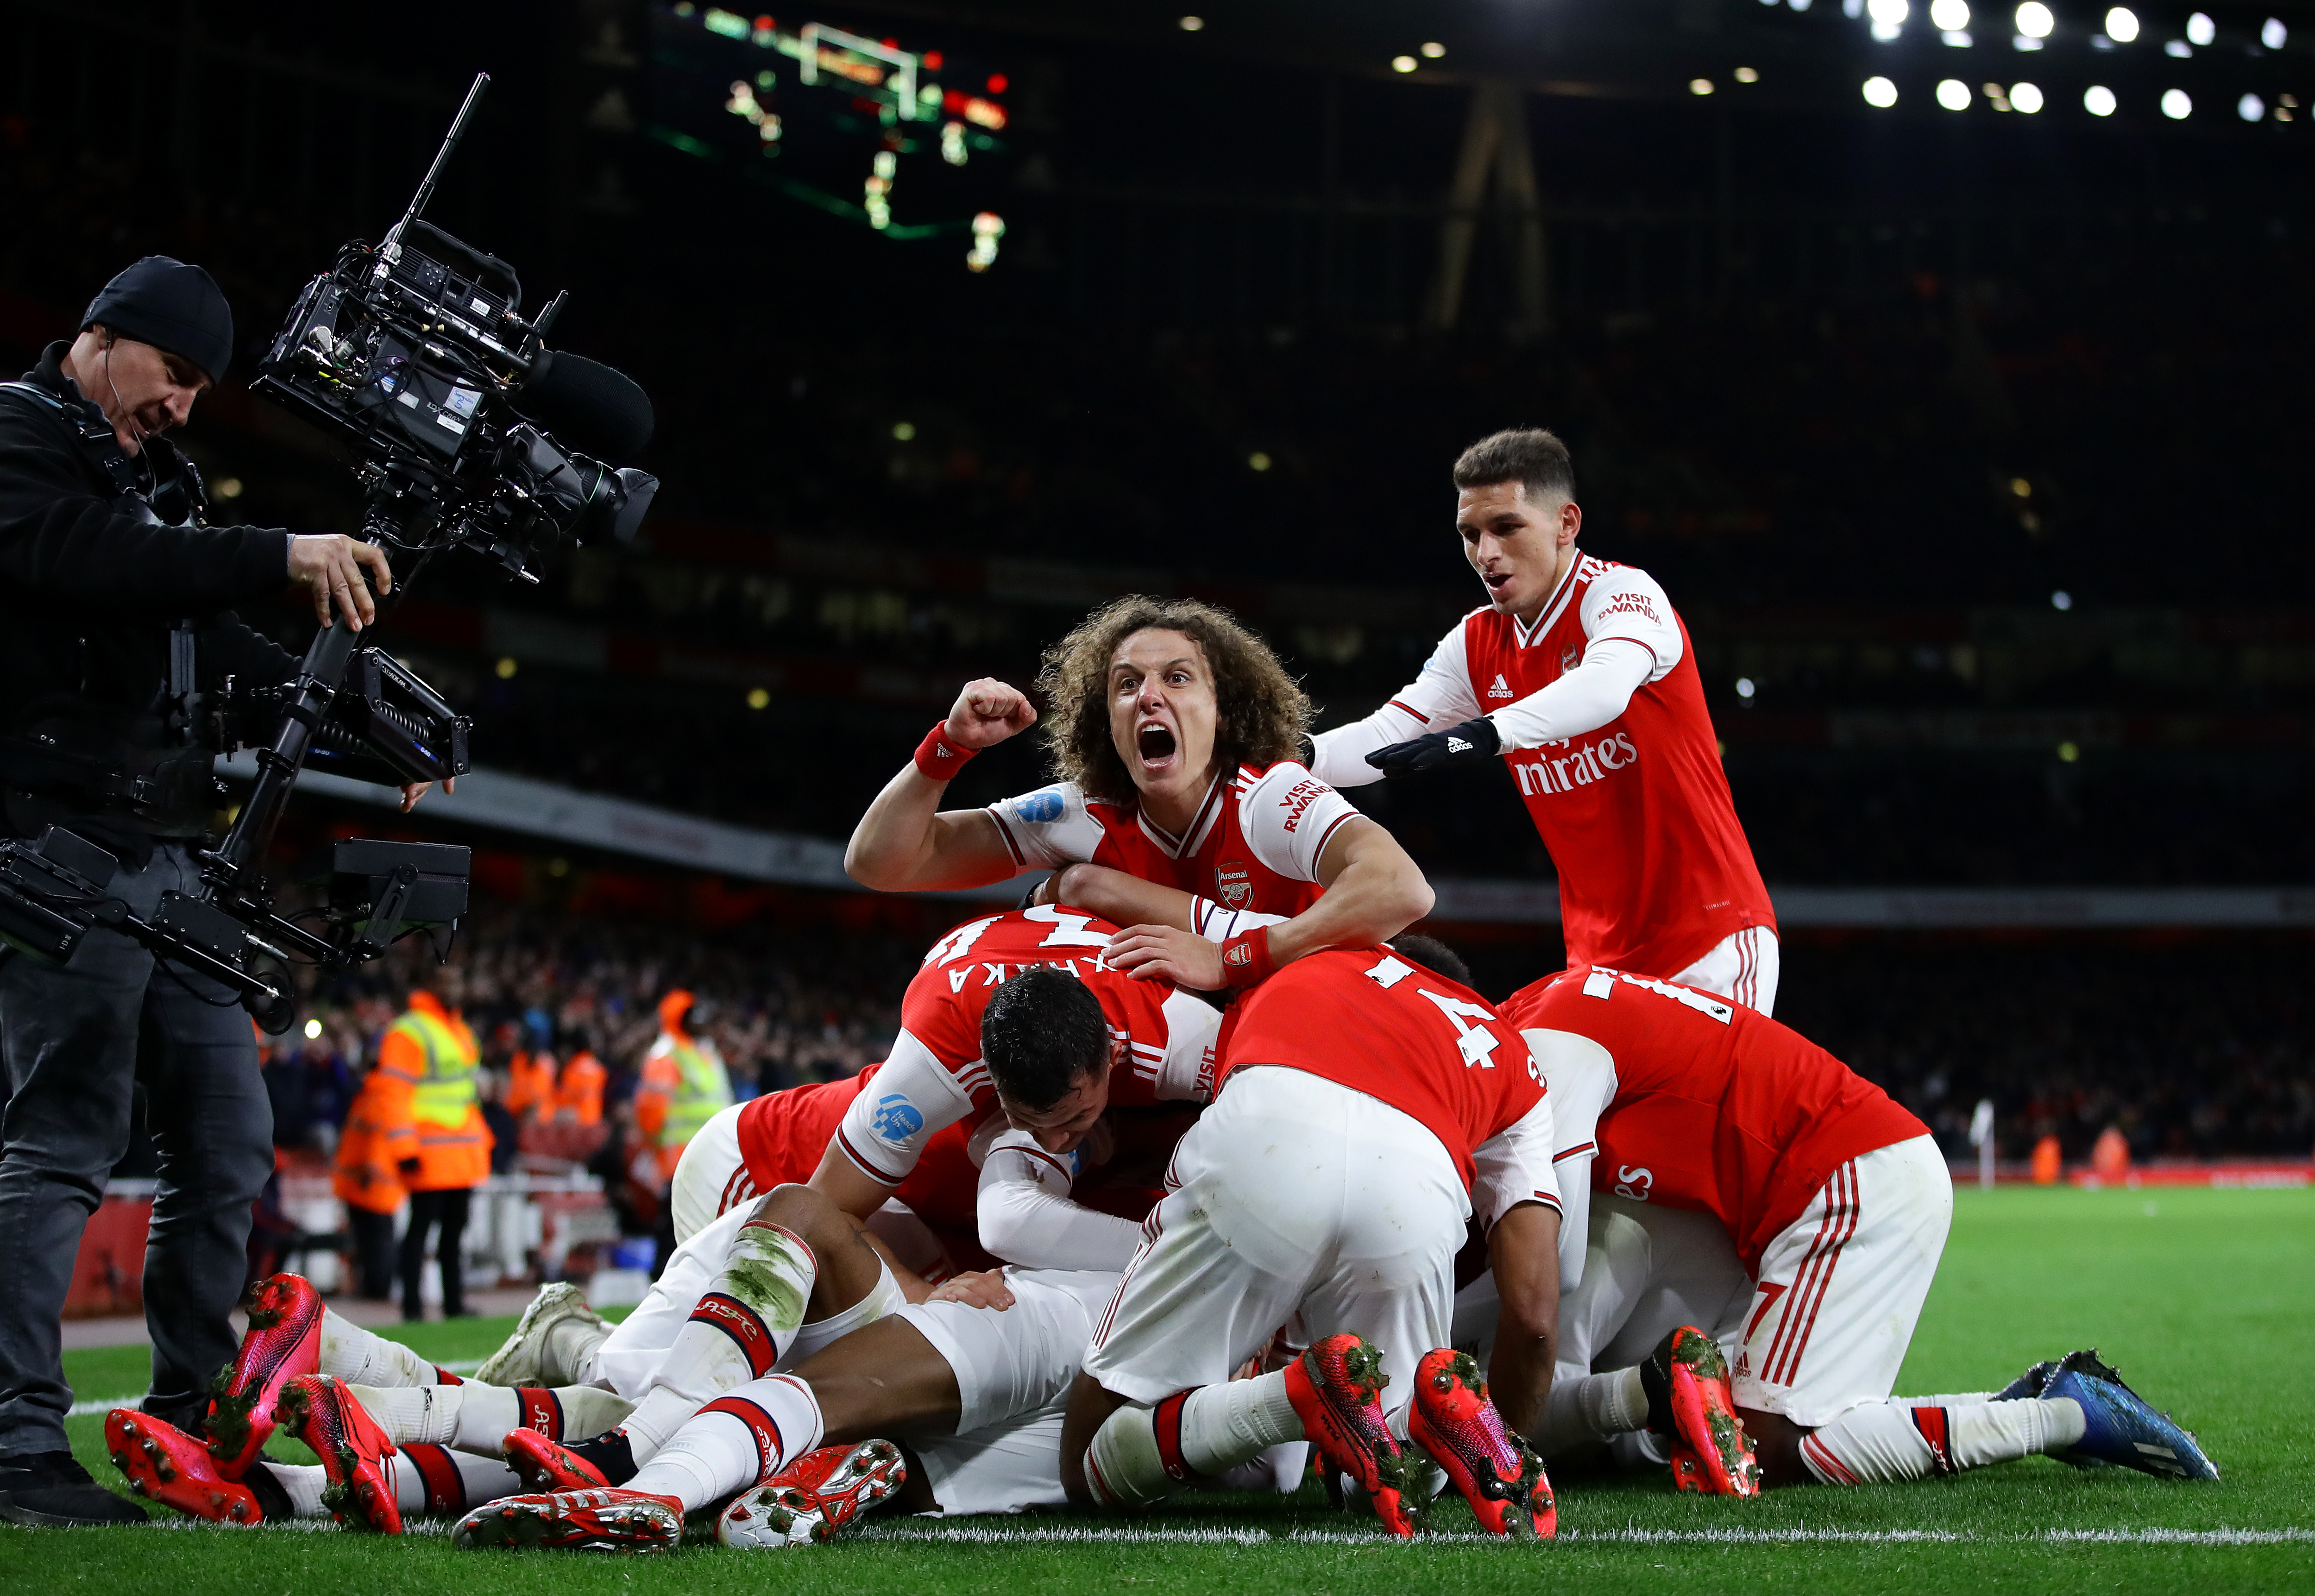 LONDON, ENGLAND - FEBRUARY 16: David Luiz of Arsenal celebrates his sides fourth goal scored by Alexandre Lacazette and team mates during the Premier League match between Arsenal FC and Newcastle United at Emirates Stadium on February 16, 2020 in London, United Kingdom. (Photo by Richard Heathcote/Getty Images)